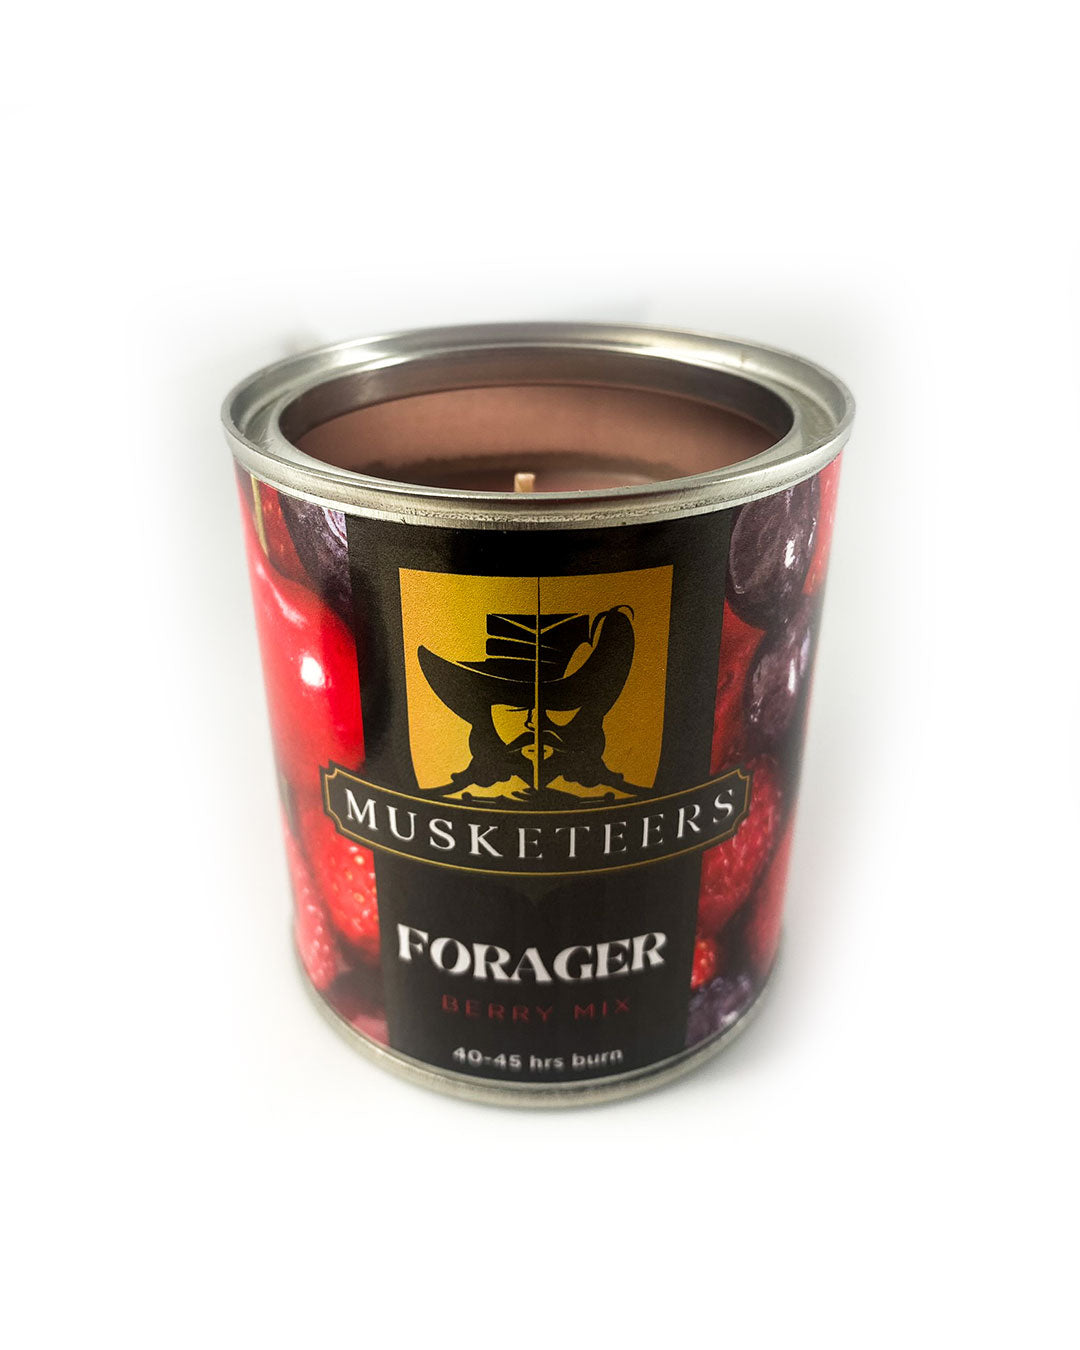 Forager - Berry Mix Candle